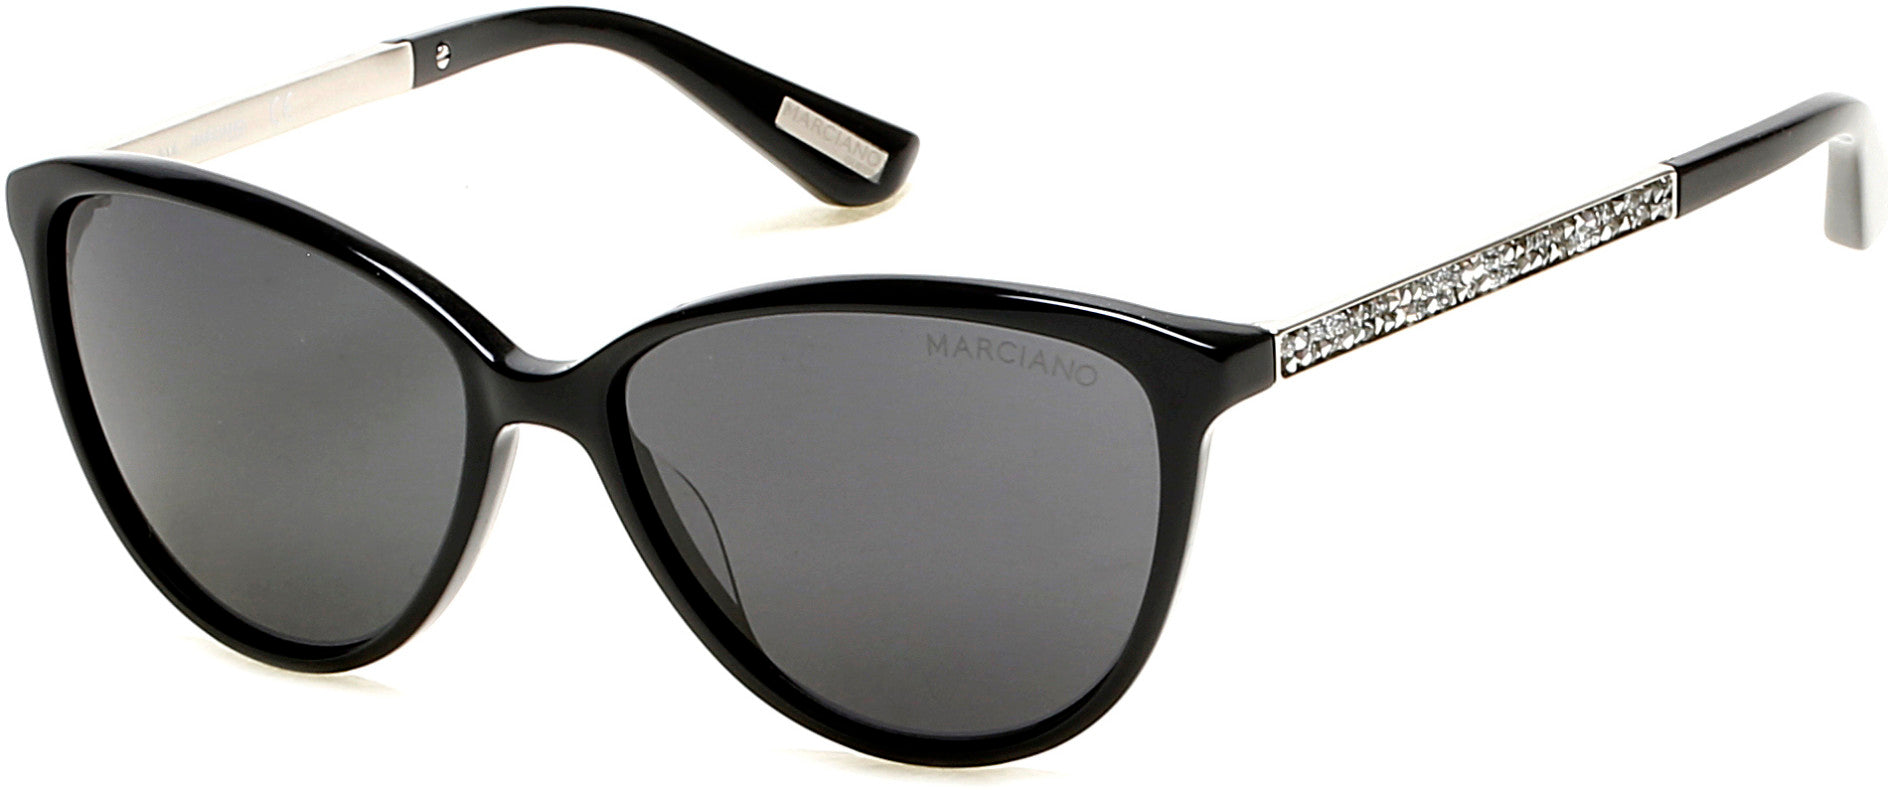 Guess By Marciano GM0755 Cat Sunglasses 01A-01A - Shiny Black/smoke Lens